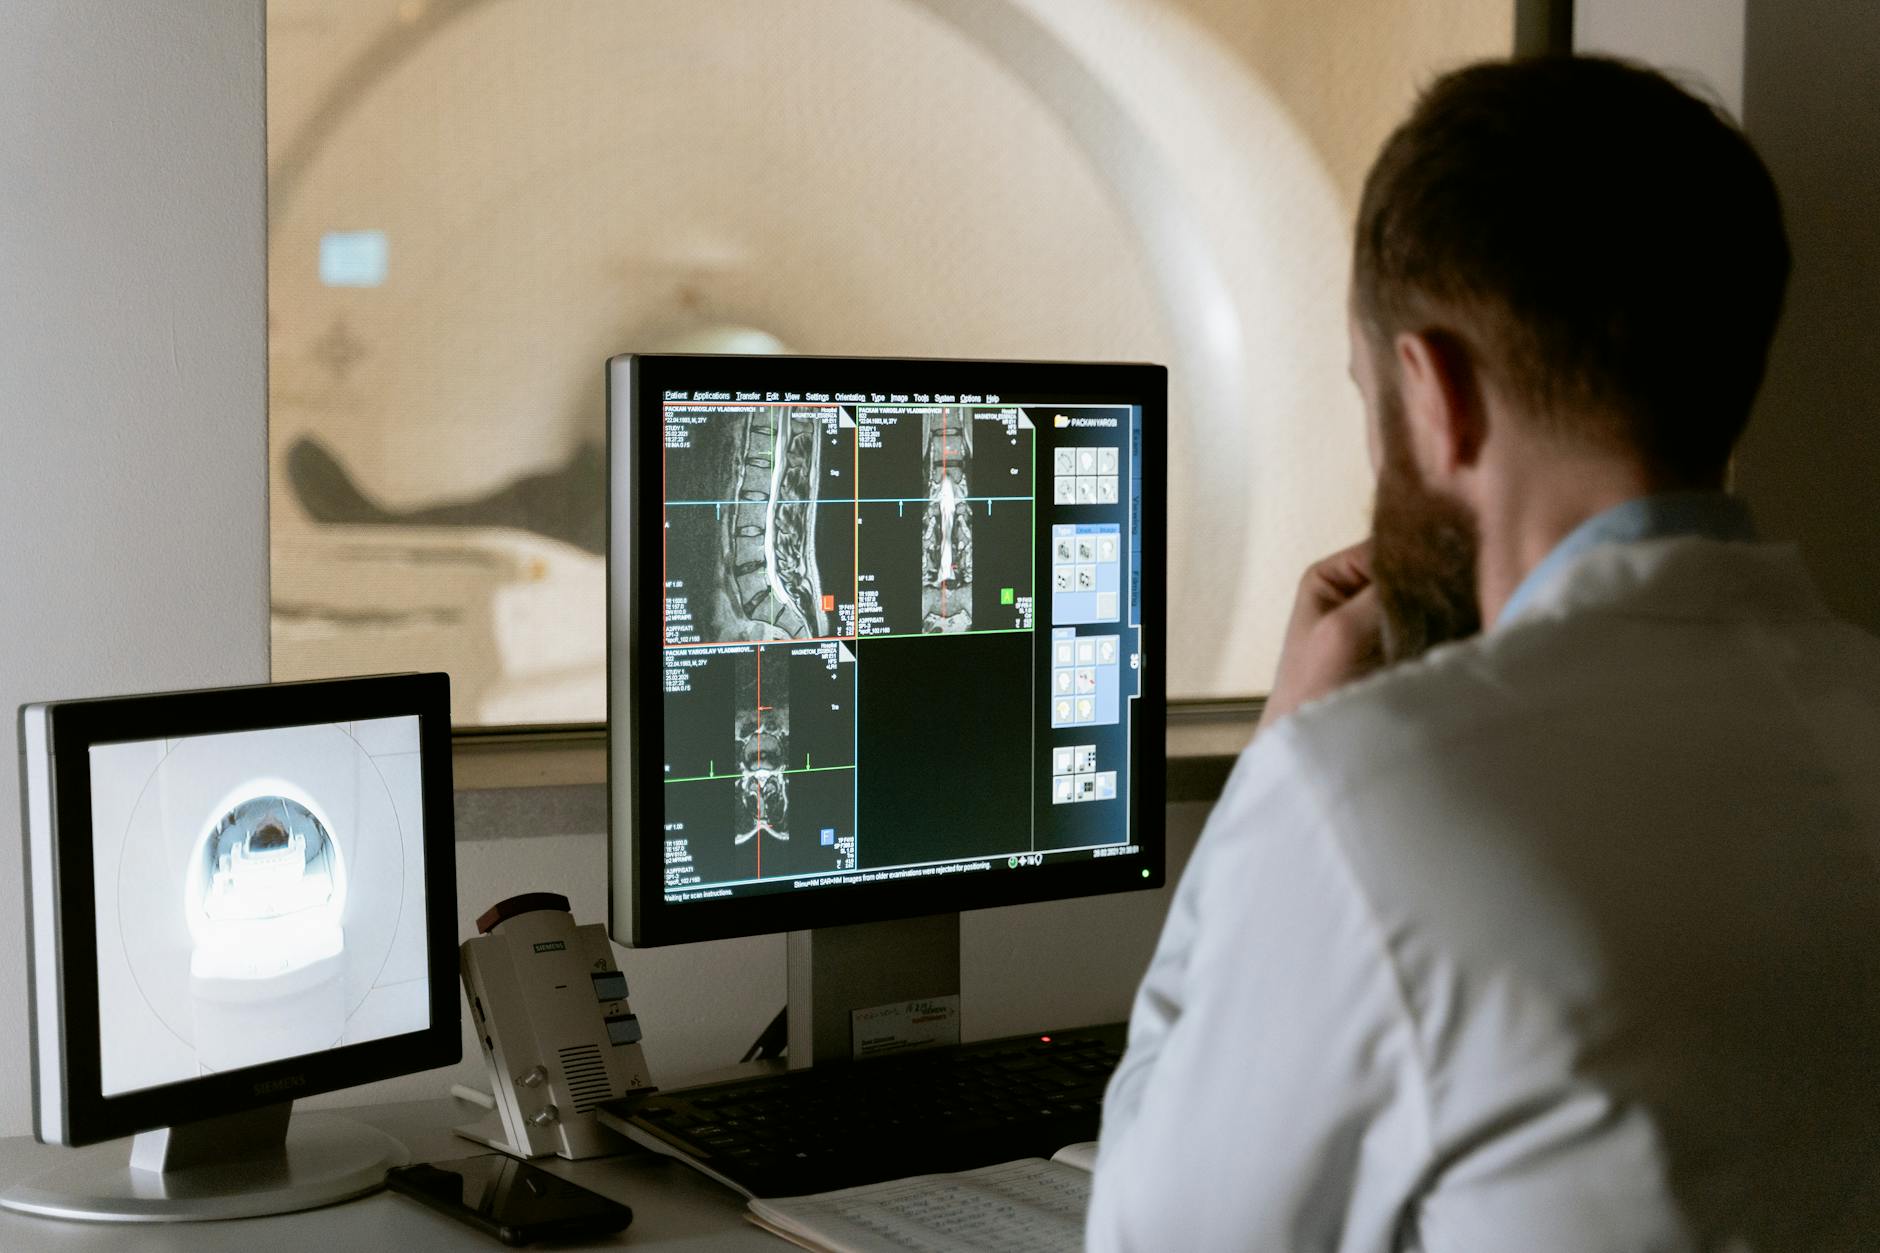 A radiology technician looks at the monitor while the patient in the adjoining room receives a computed tomography (CT) scan.